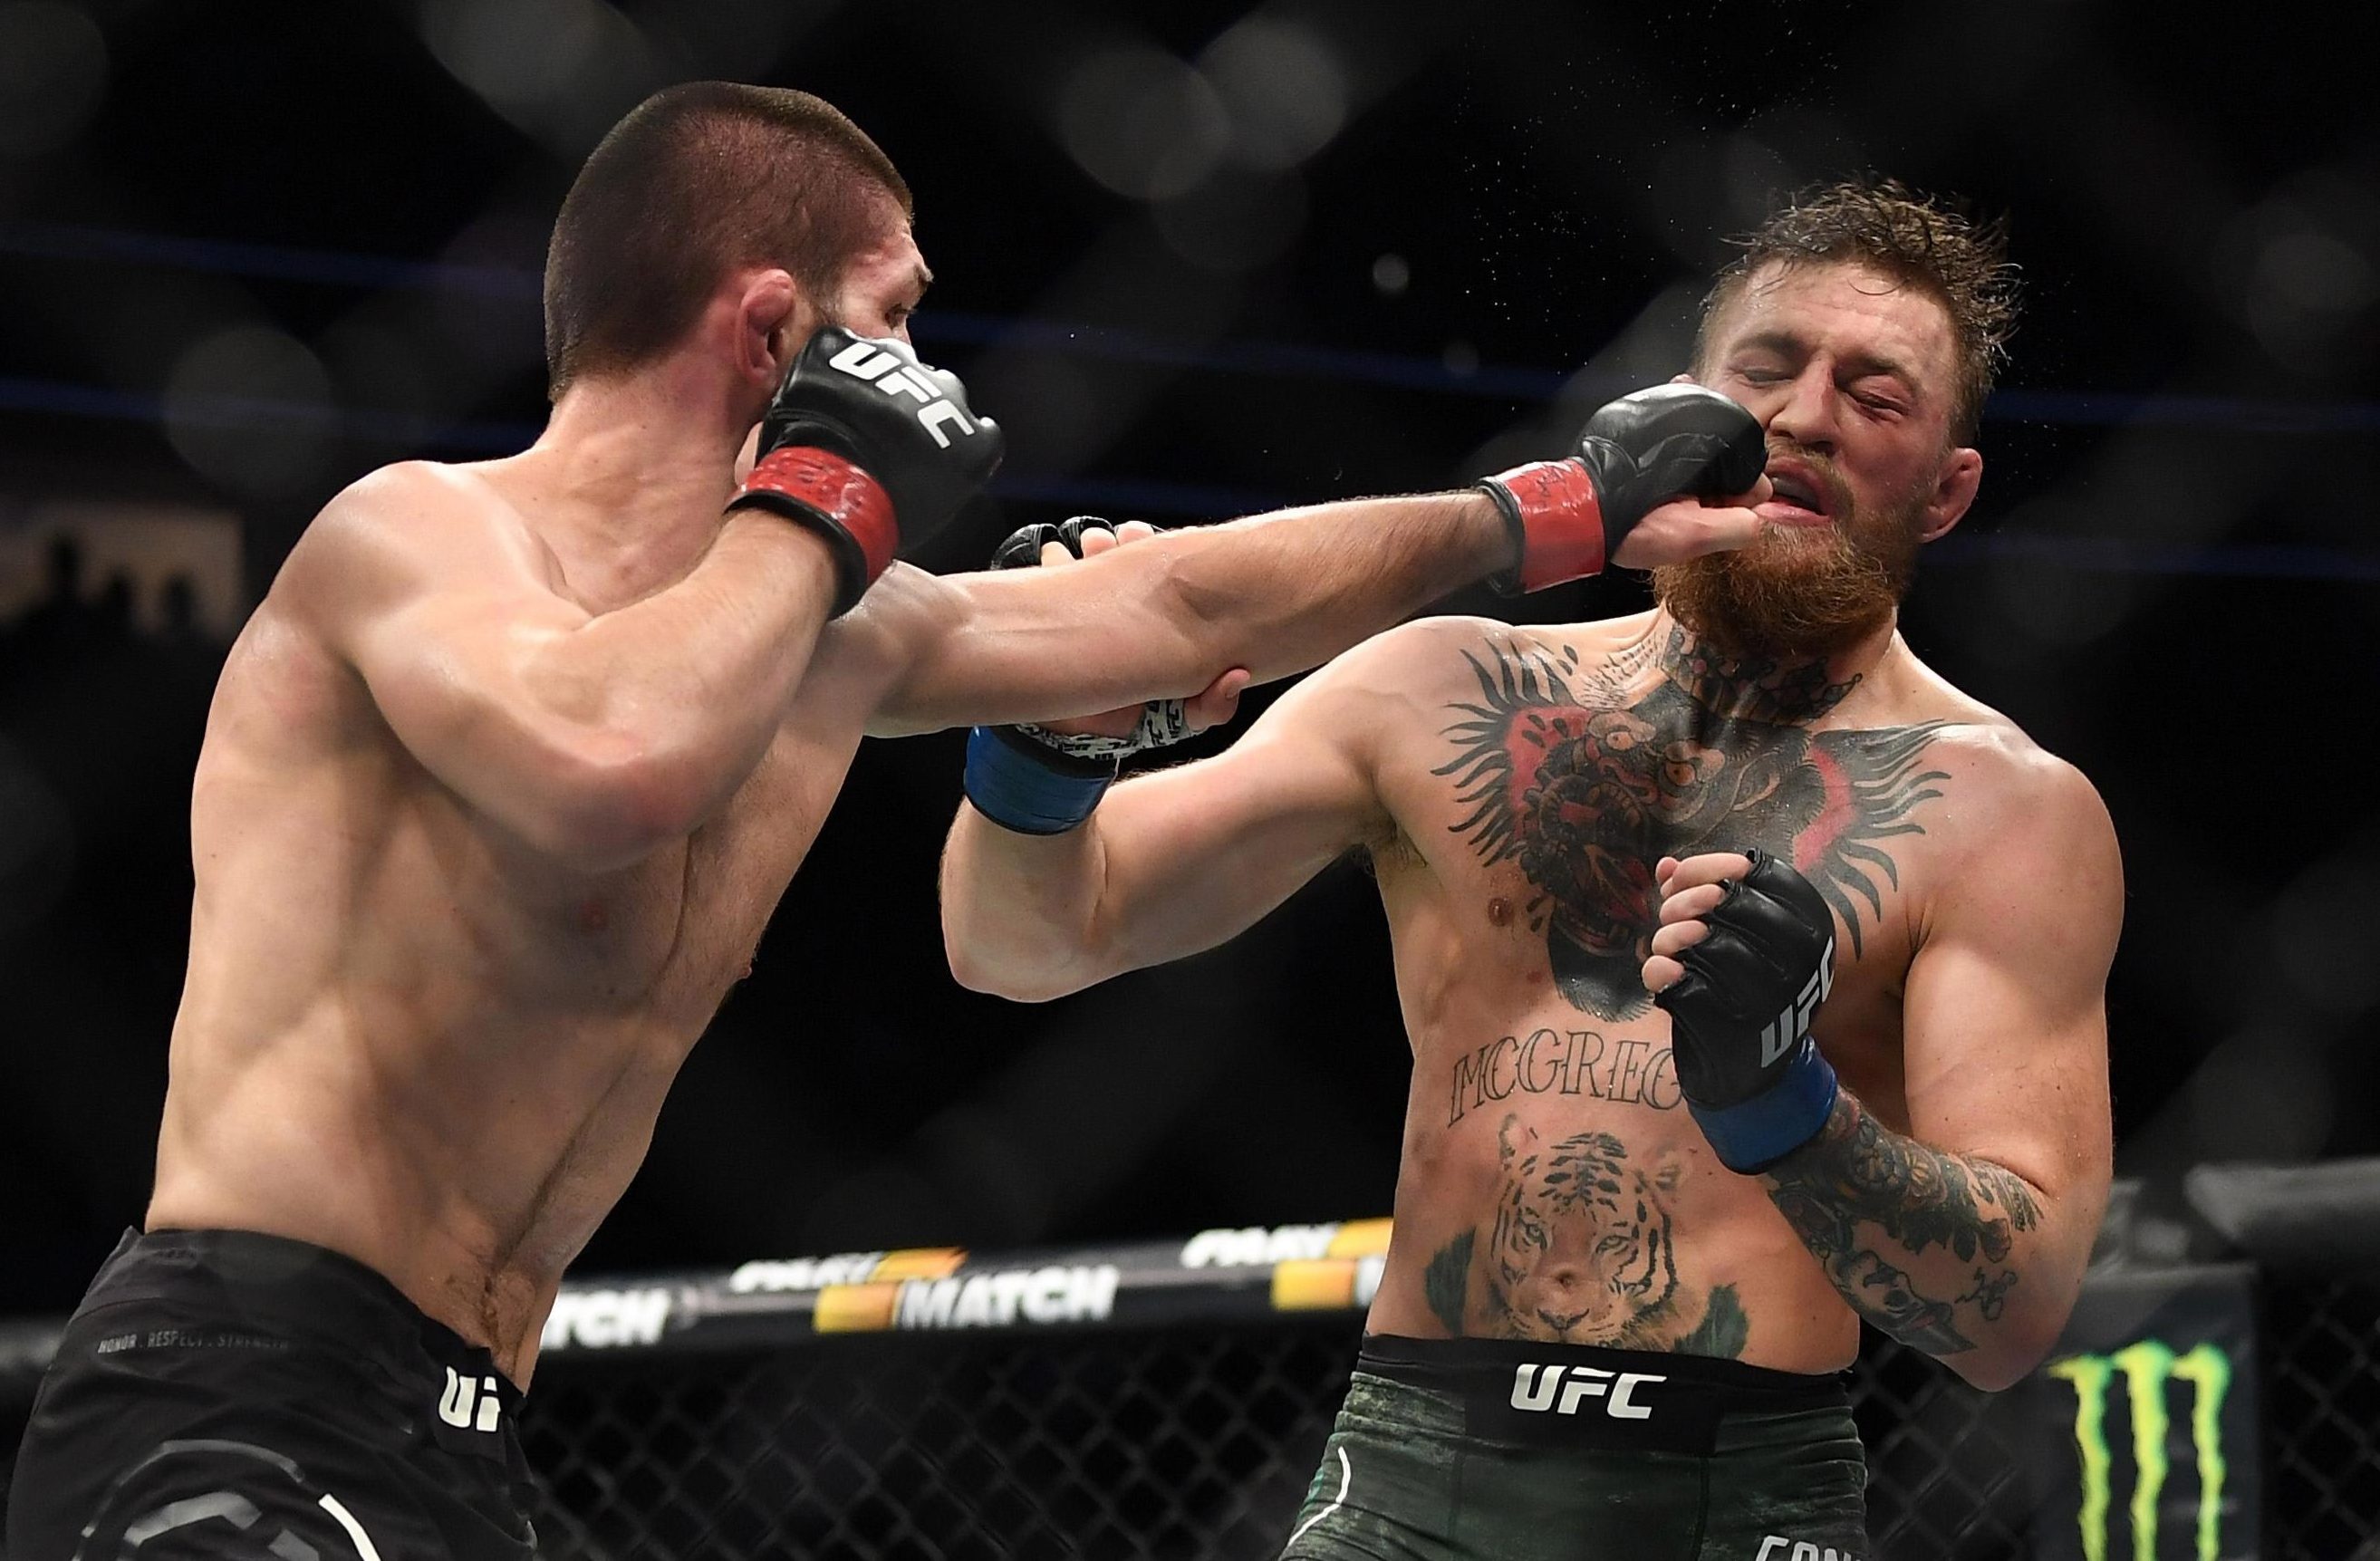 A Video Has Emerged Highlighting All The Ways Conor McGregor Cheated Against Khabib ...2627 x 1723